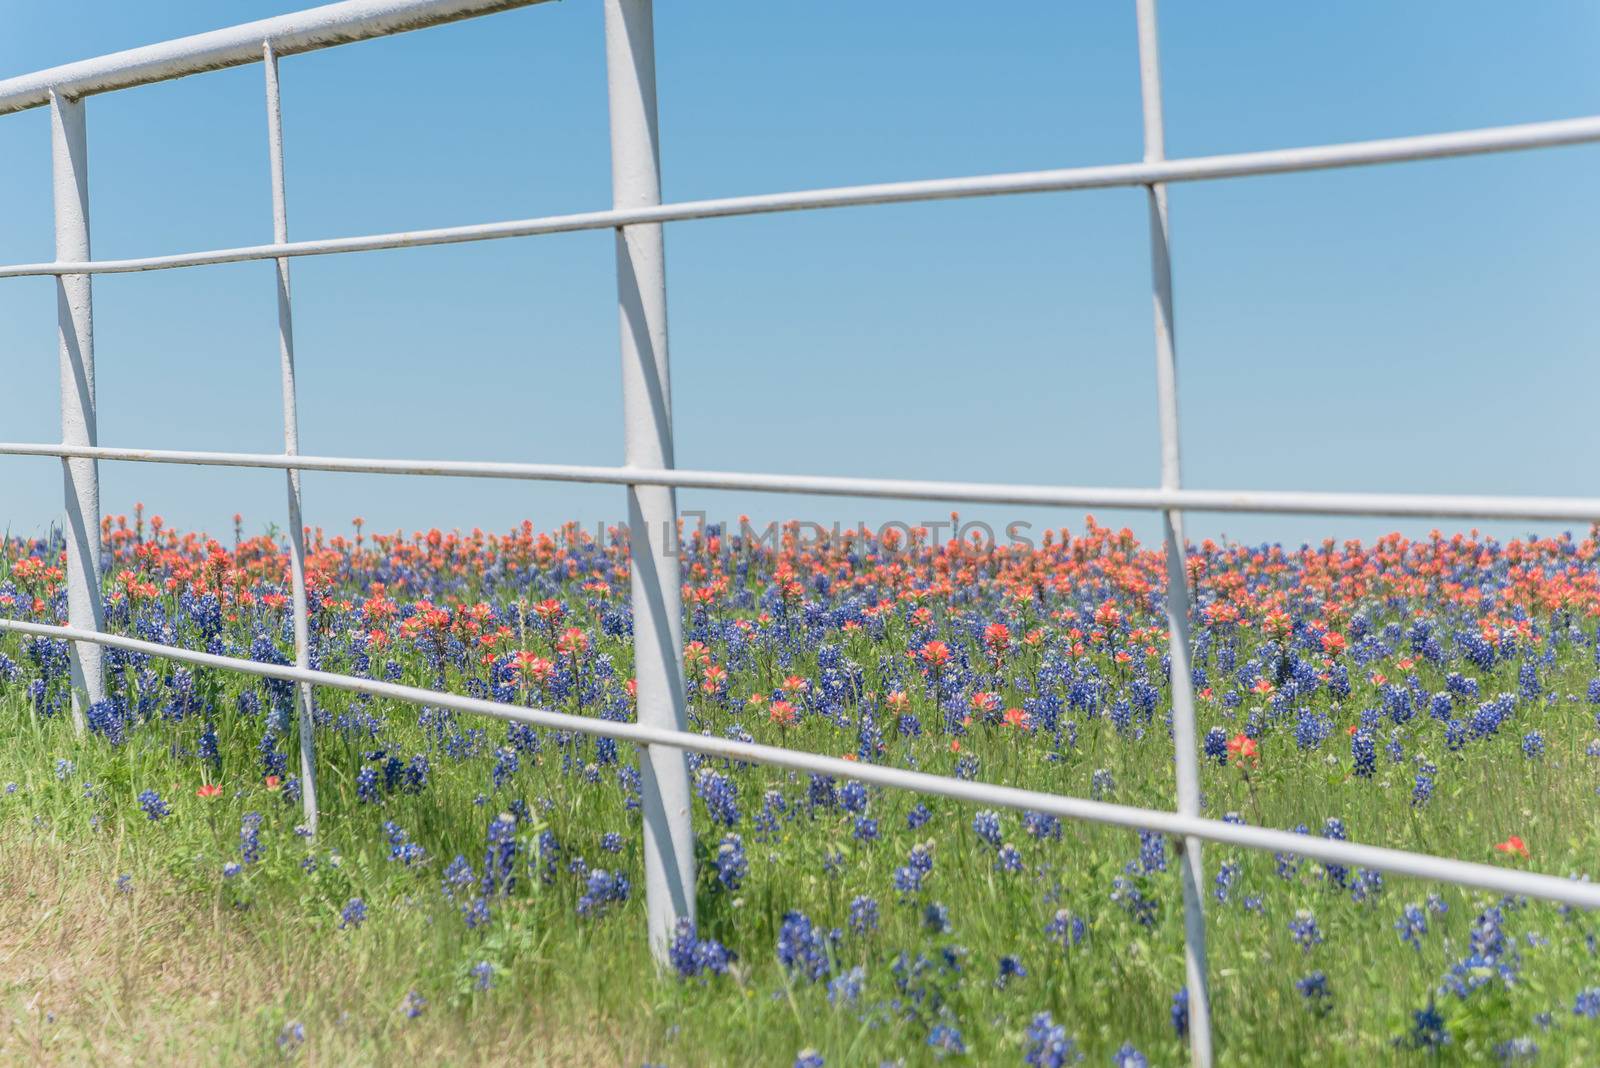 Large fields of Paintbrush DescriptionCastilleja foliolosa and Bluebonnet blooming near white metal fence of farm in Bristol, Texas, USA. Beautiful wildflower meadow blossom in springtime